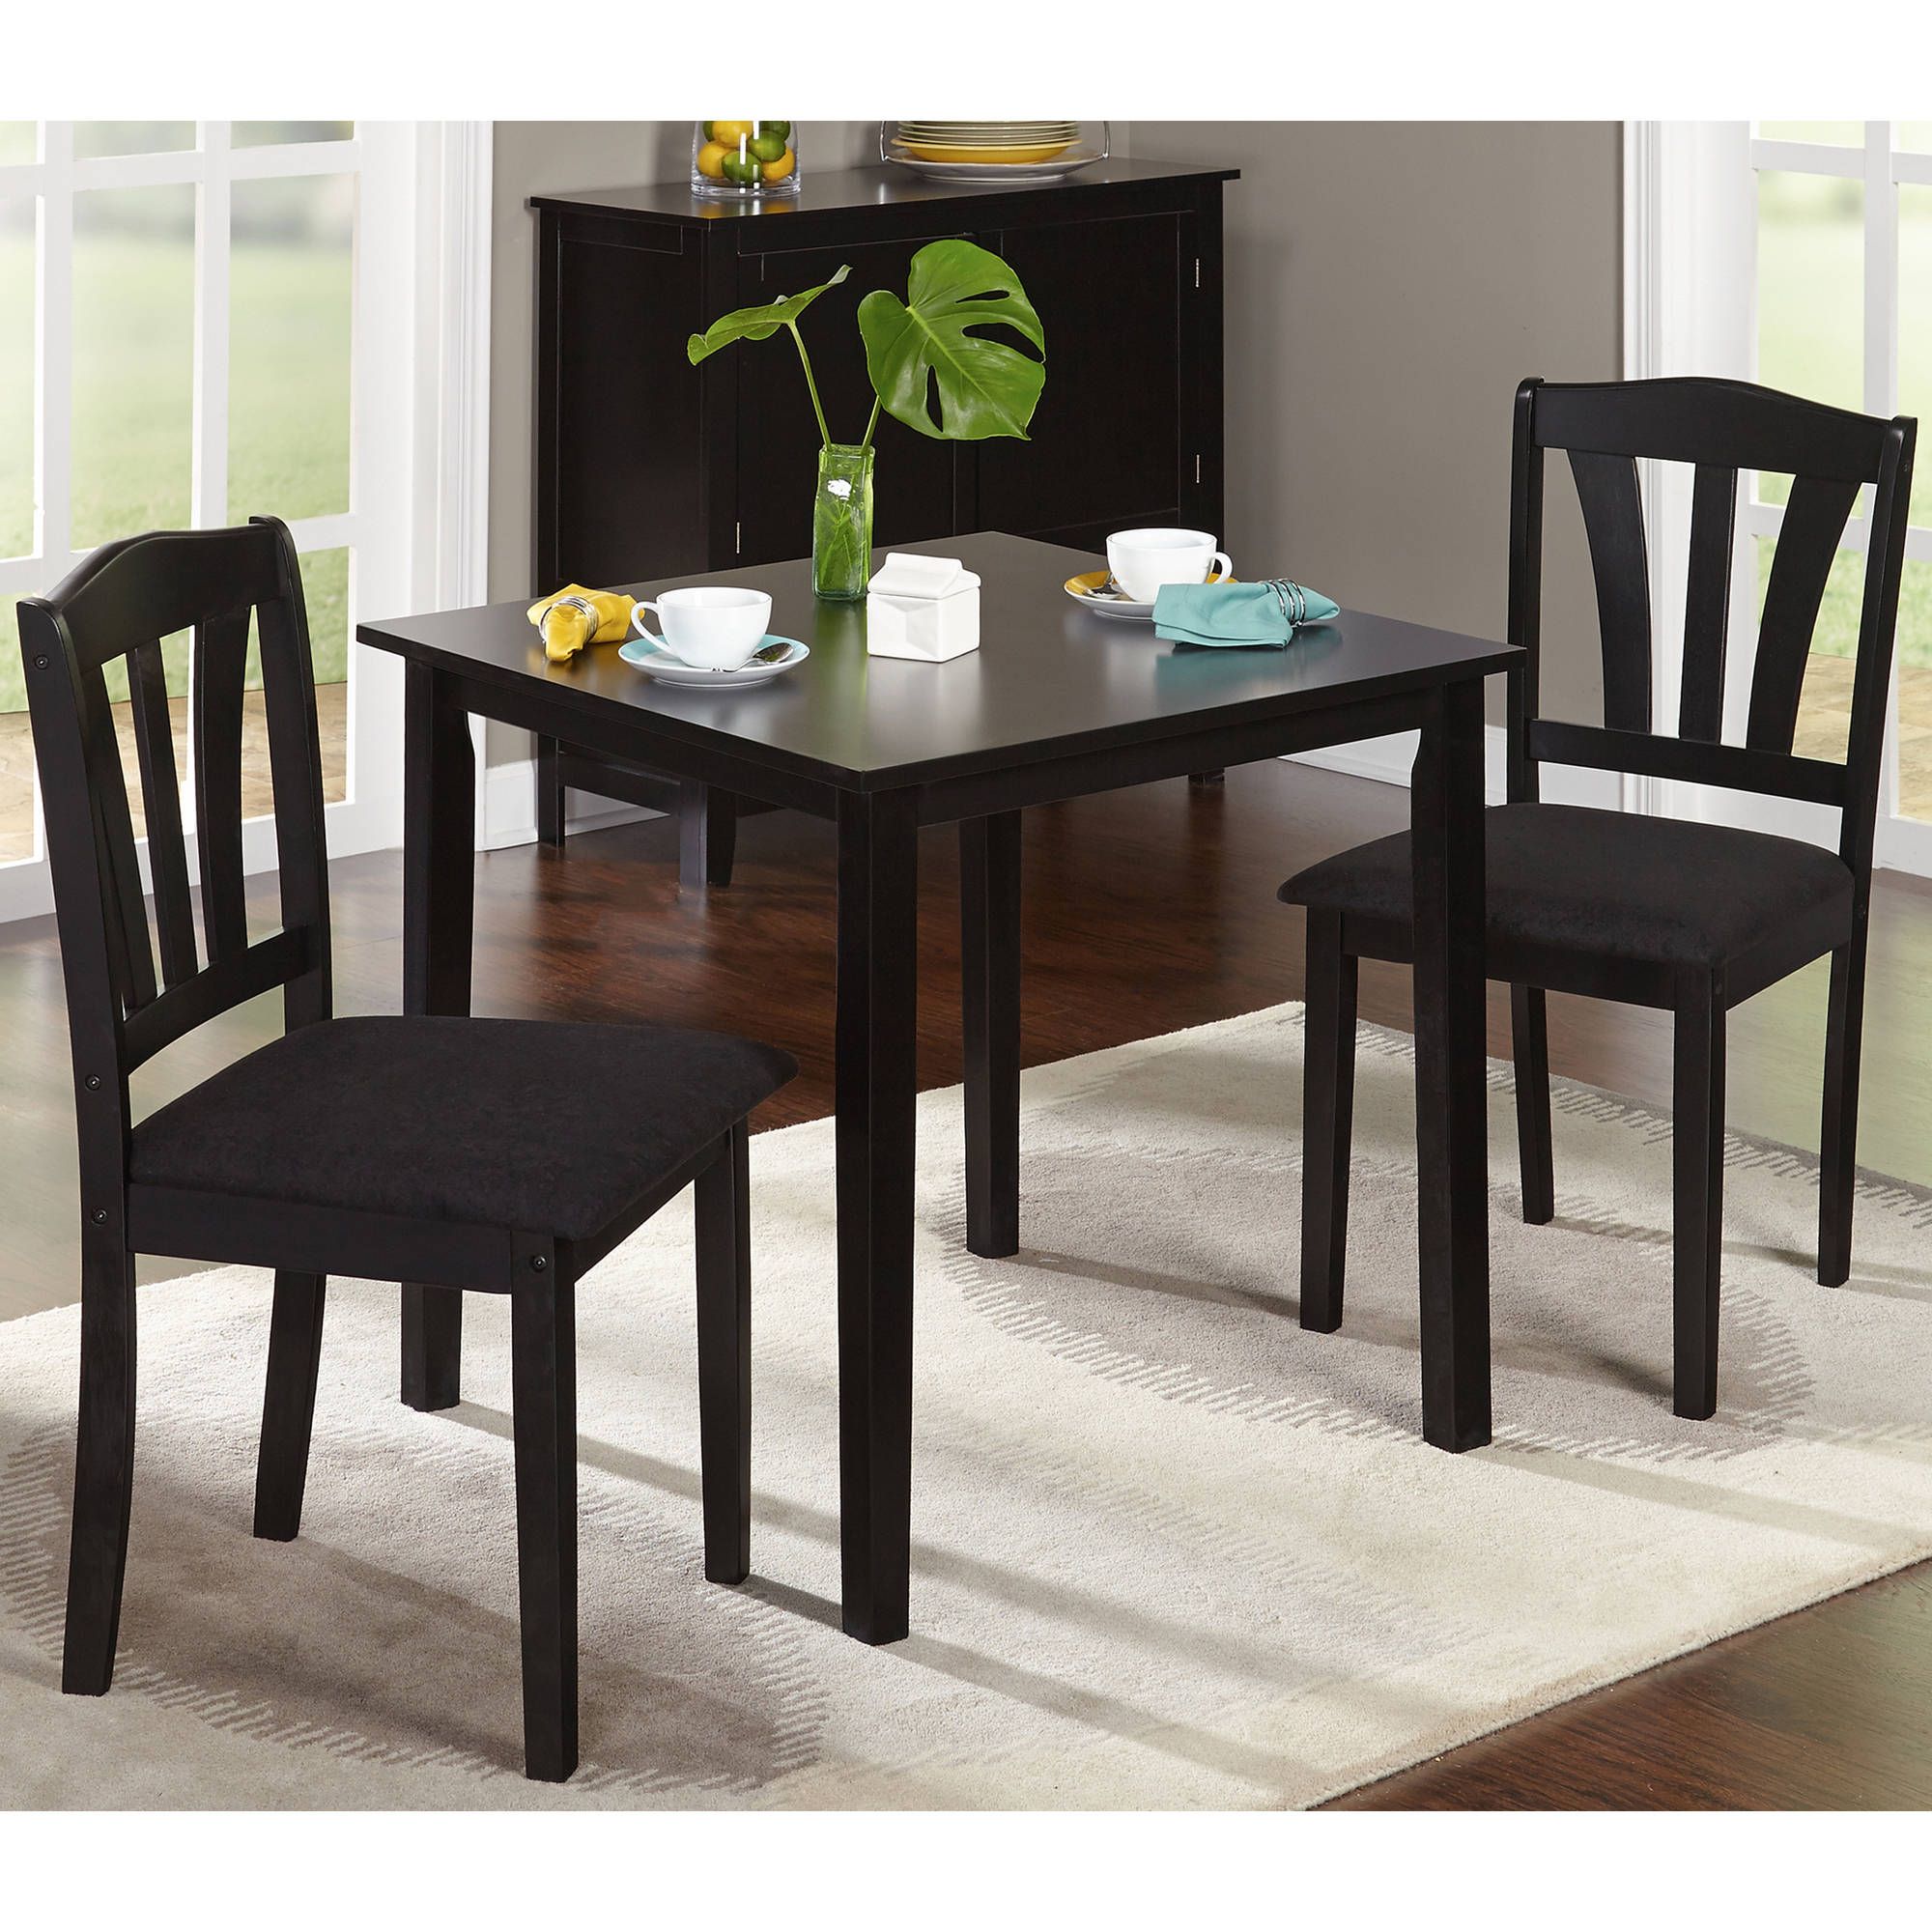 Most Popular Metropolitan 3 Piece Dining Set, Multiple Finishes Regarding 3 Piece Dining Sets (View 1 of 20)